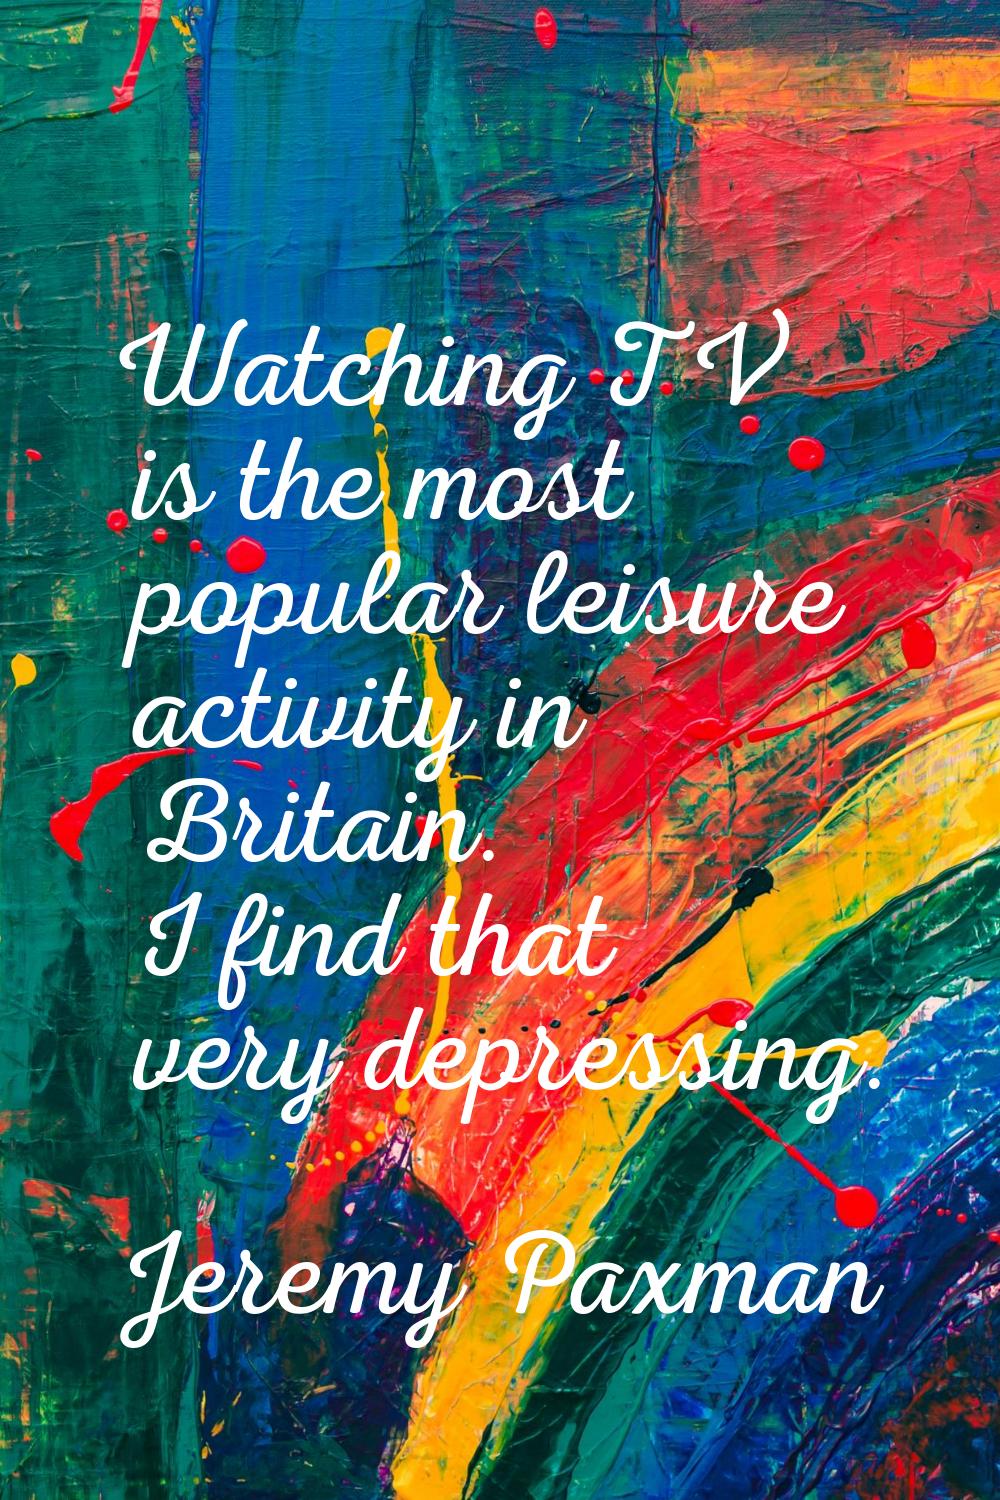 Watching TV is the most popular leisure activity in Britain. I find that very depressing.